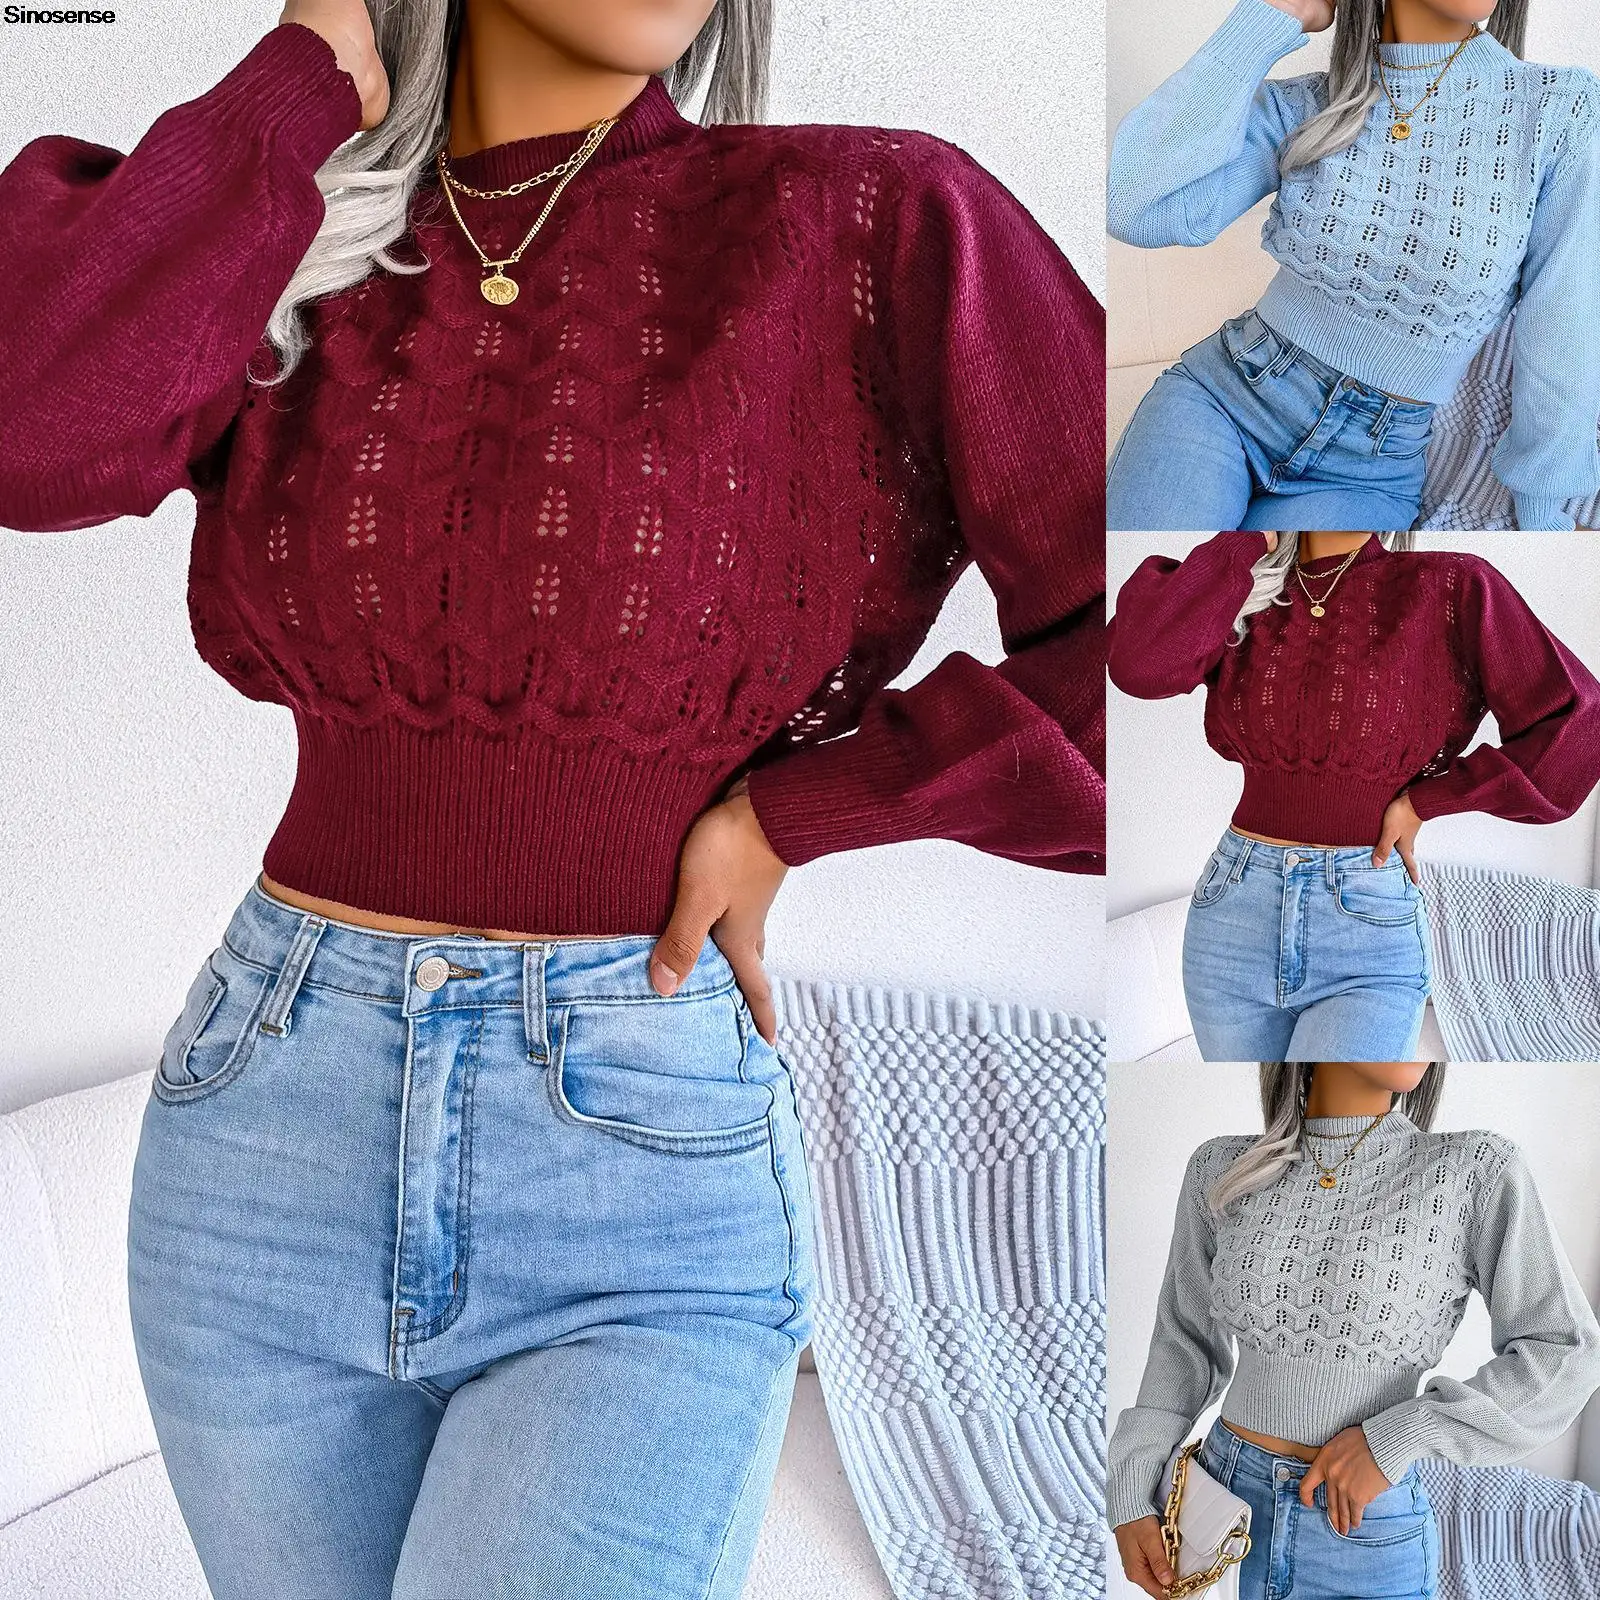 

Women Autumn Winter Cropped Sweater Sexy Hollow Out Mock Neck Lantern Long Sleeve Fall Chunky Cable Knit Pullover Jumper Tops